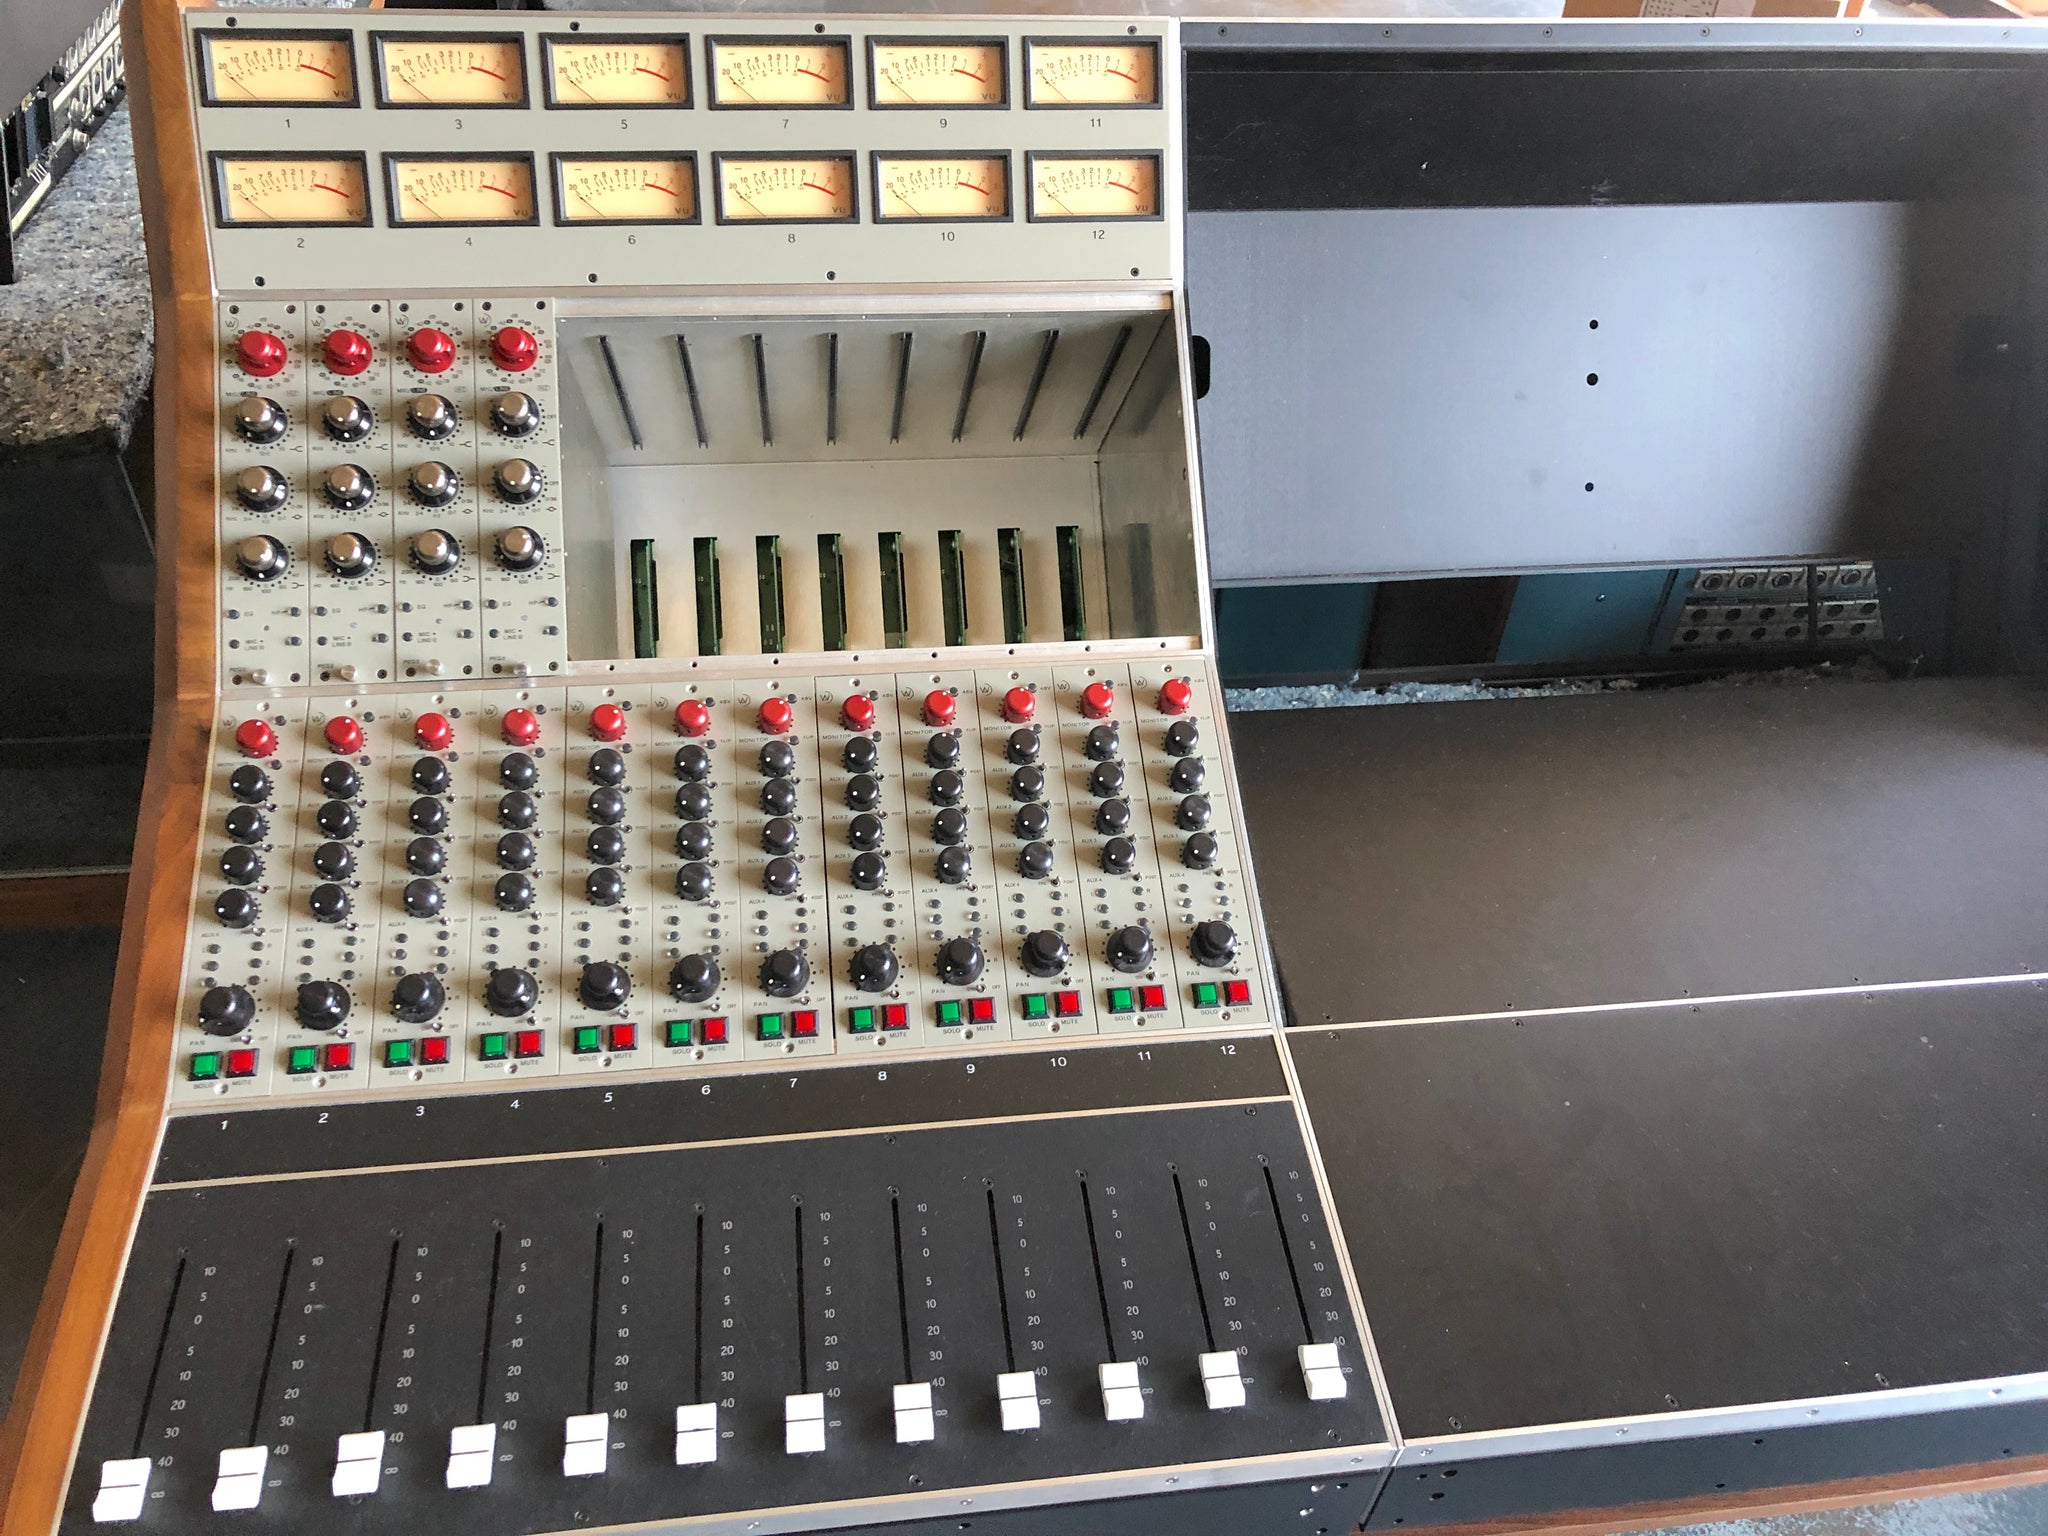 Wunder Audio Wunderbar 32 Channel Analog Recording Console Mixer